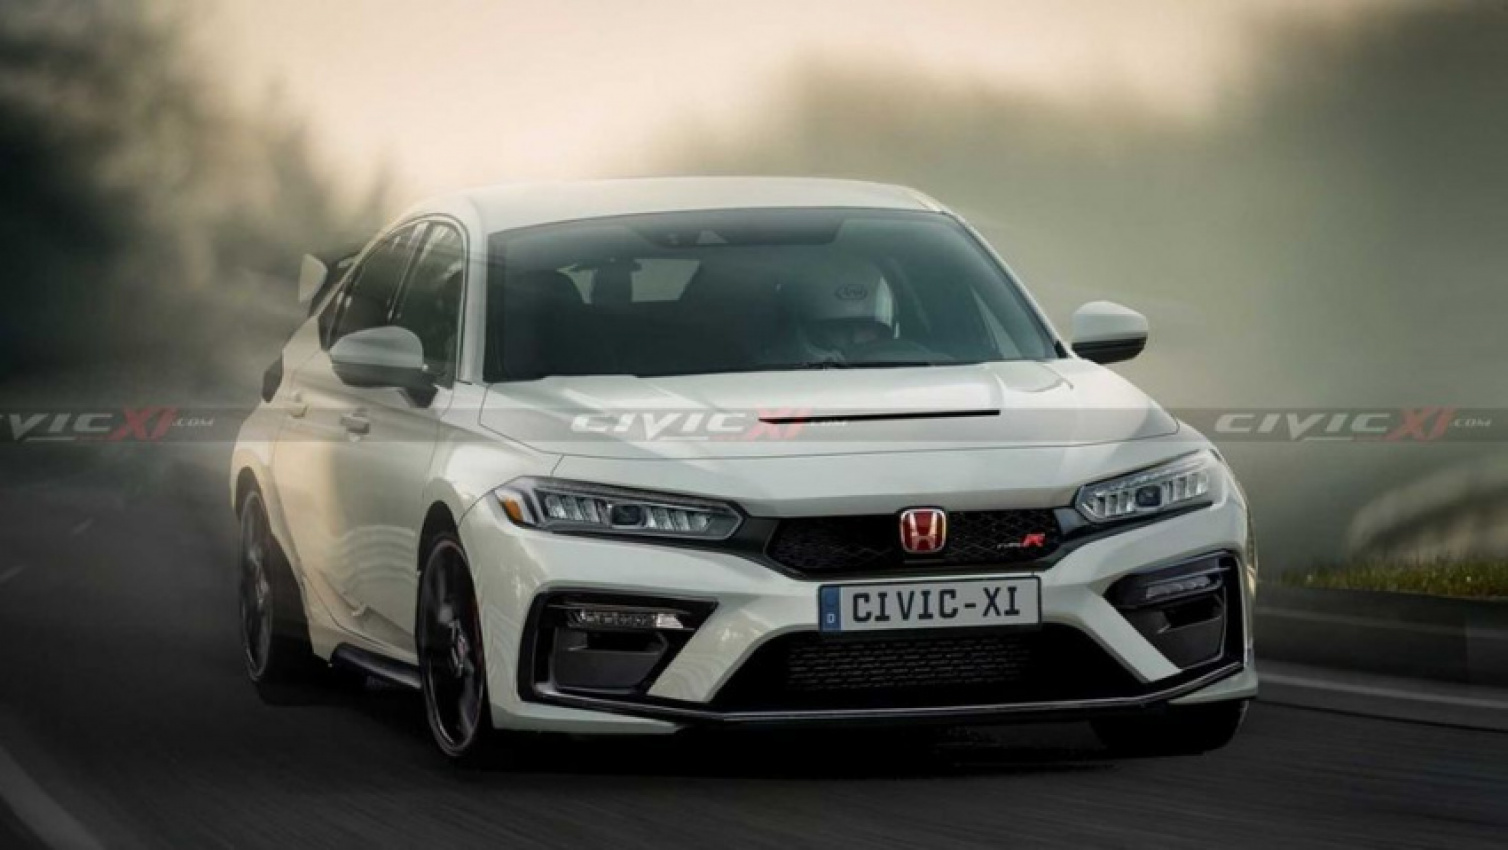 autos, cars, honda, auto news, civic, civic type r, honda civic, honda civic type r, new honda civic type r rendered, arriving in 2022?